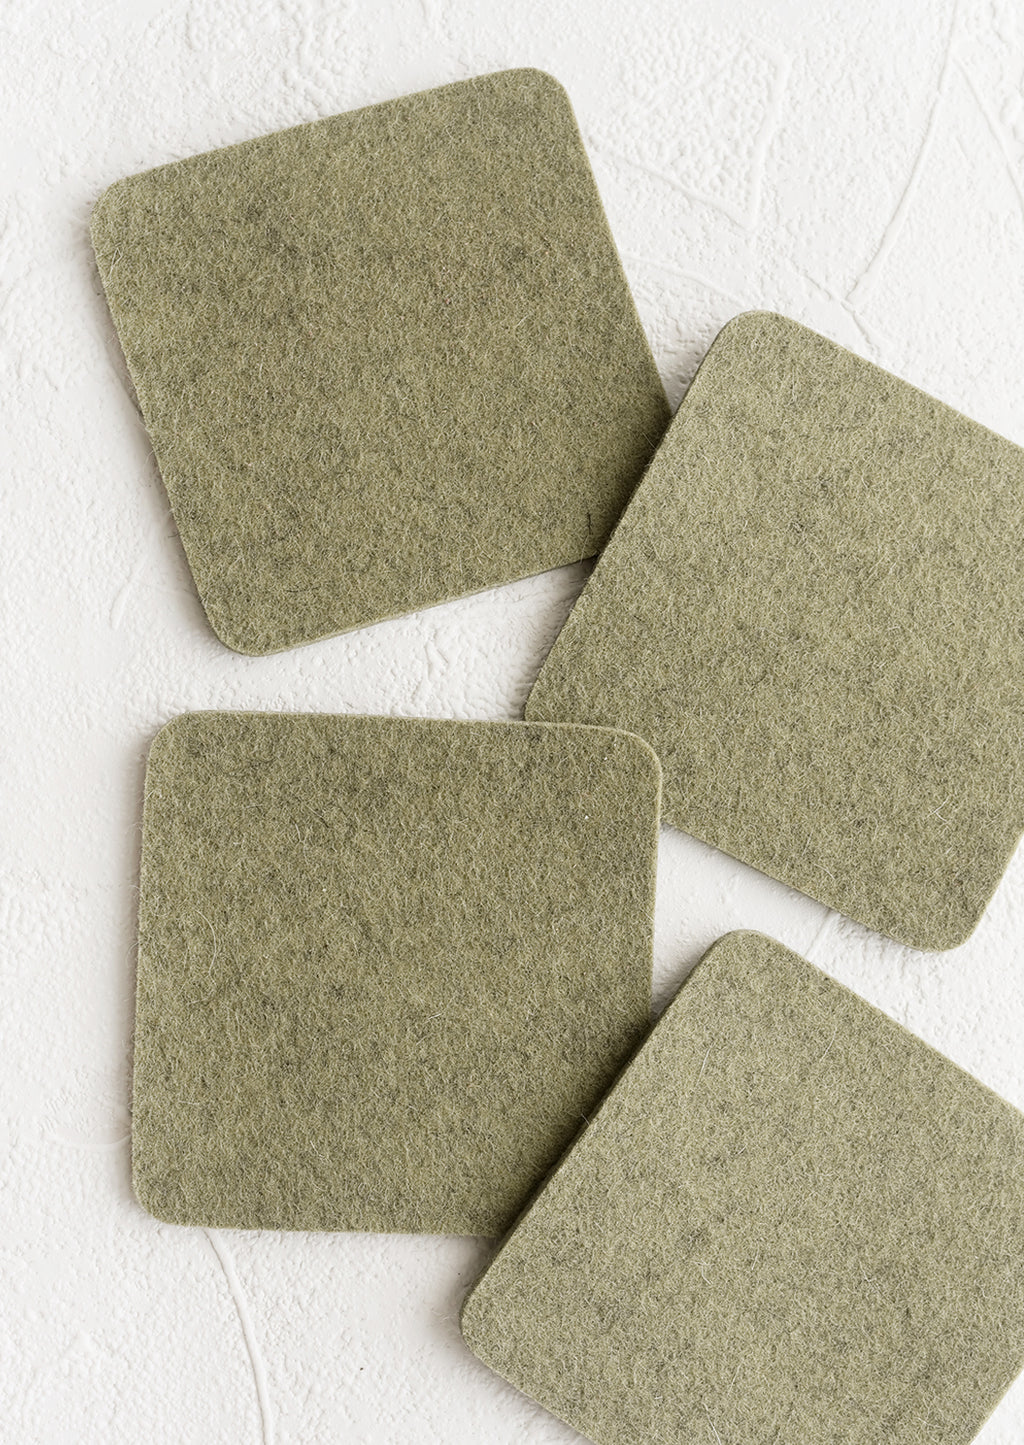 Sage: A set of four square merino wool coasters in sage green.